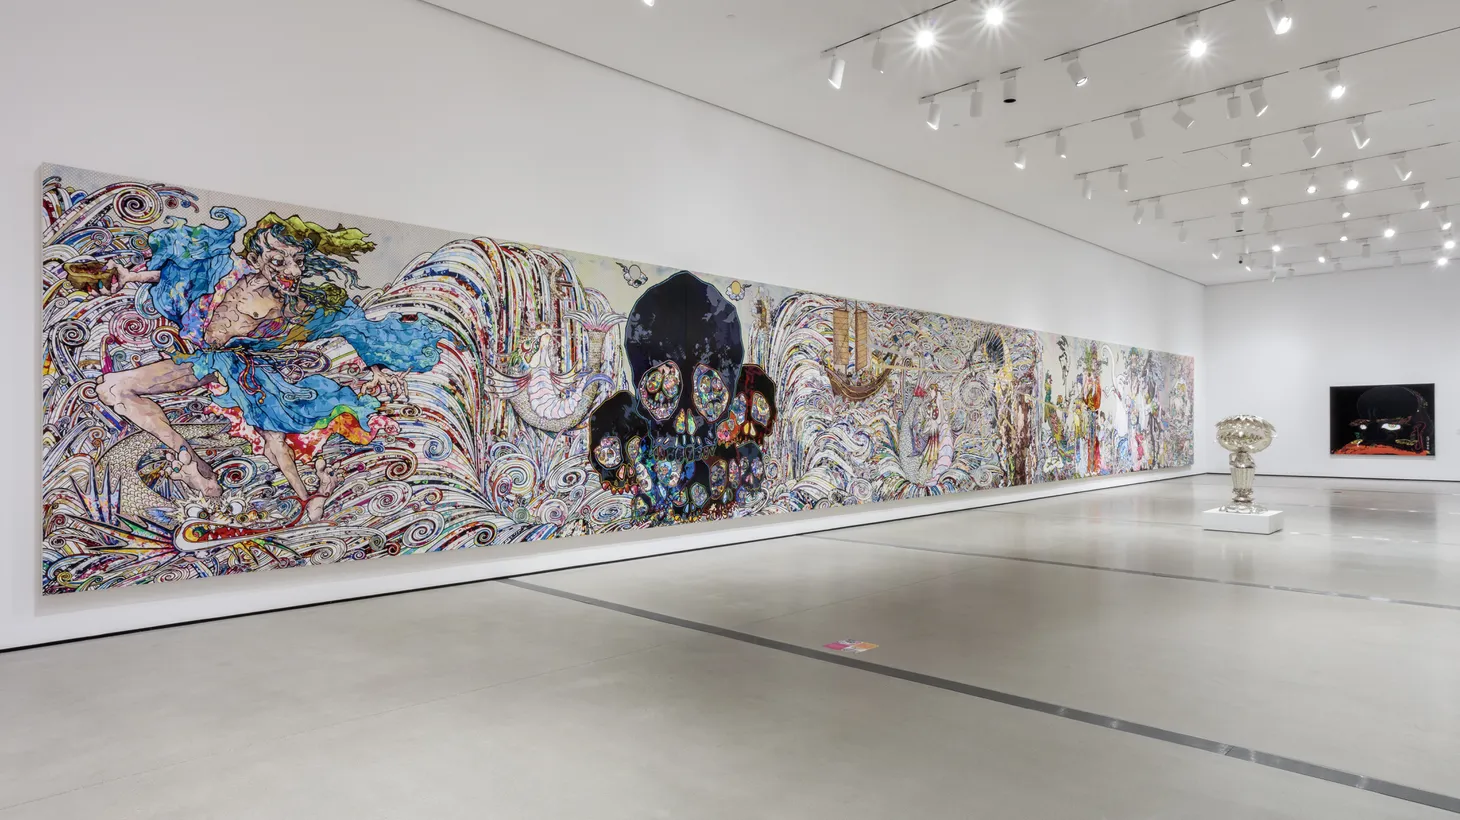 “Stepping on the Tail of a Rainbow” is Takashi Murakami’s first solo exhibition at The Broad, featuring 18 works from the artist’s expansive universe.